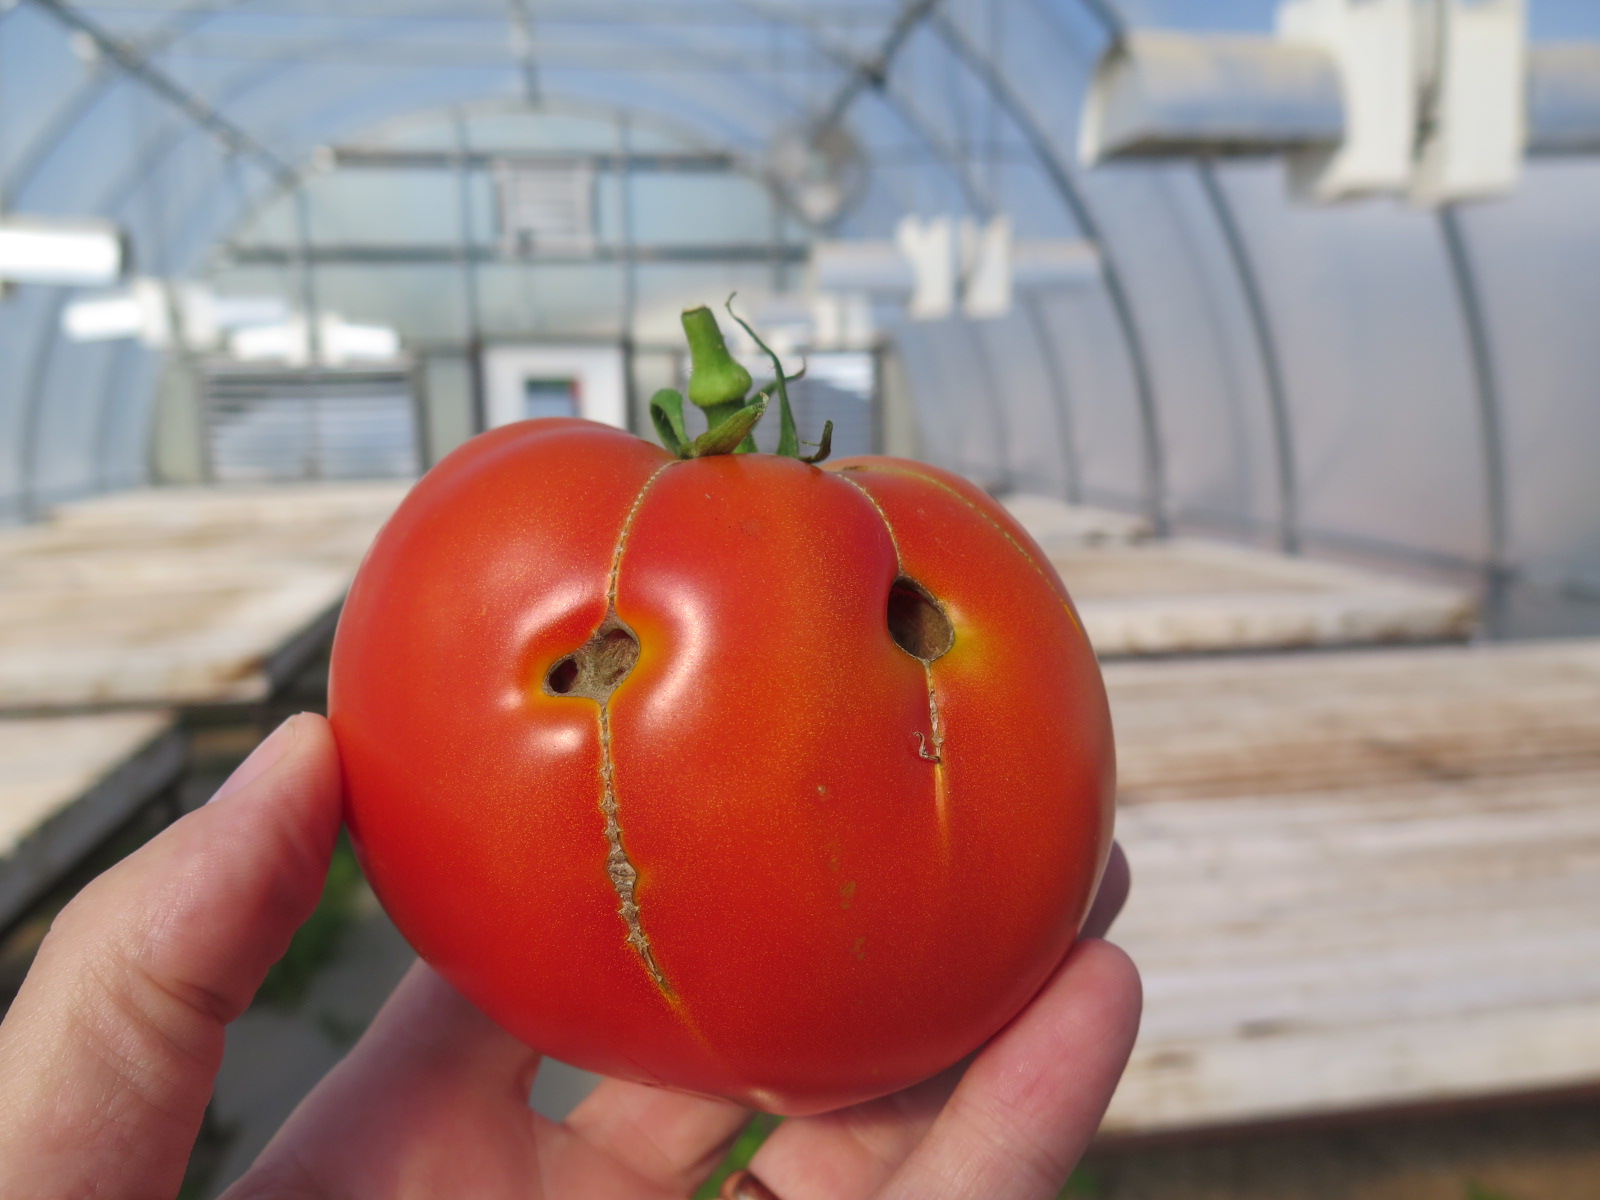 More severe zipper scar has opened up tomato fruit.